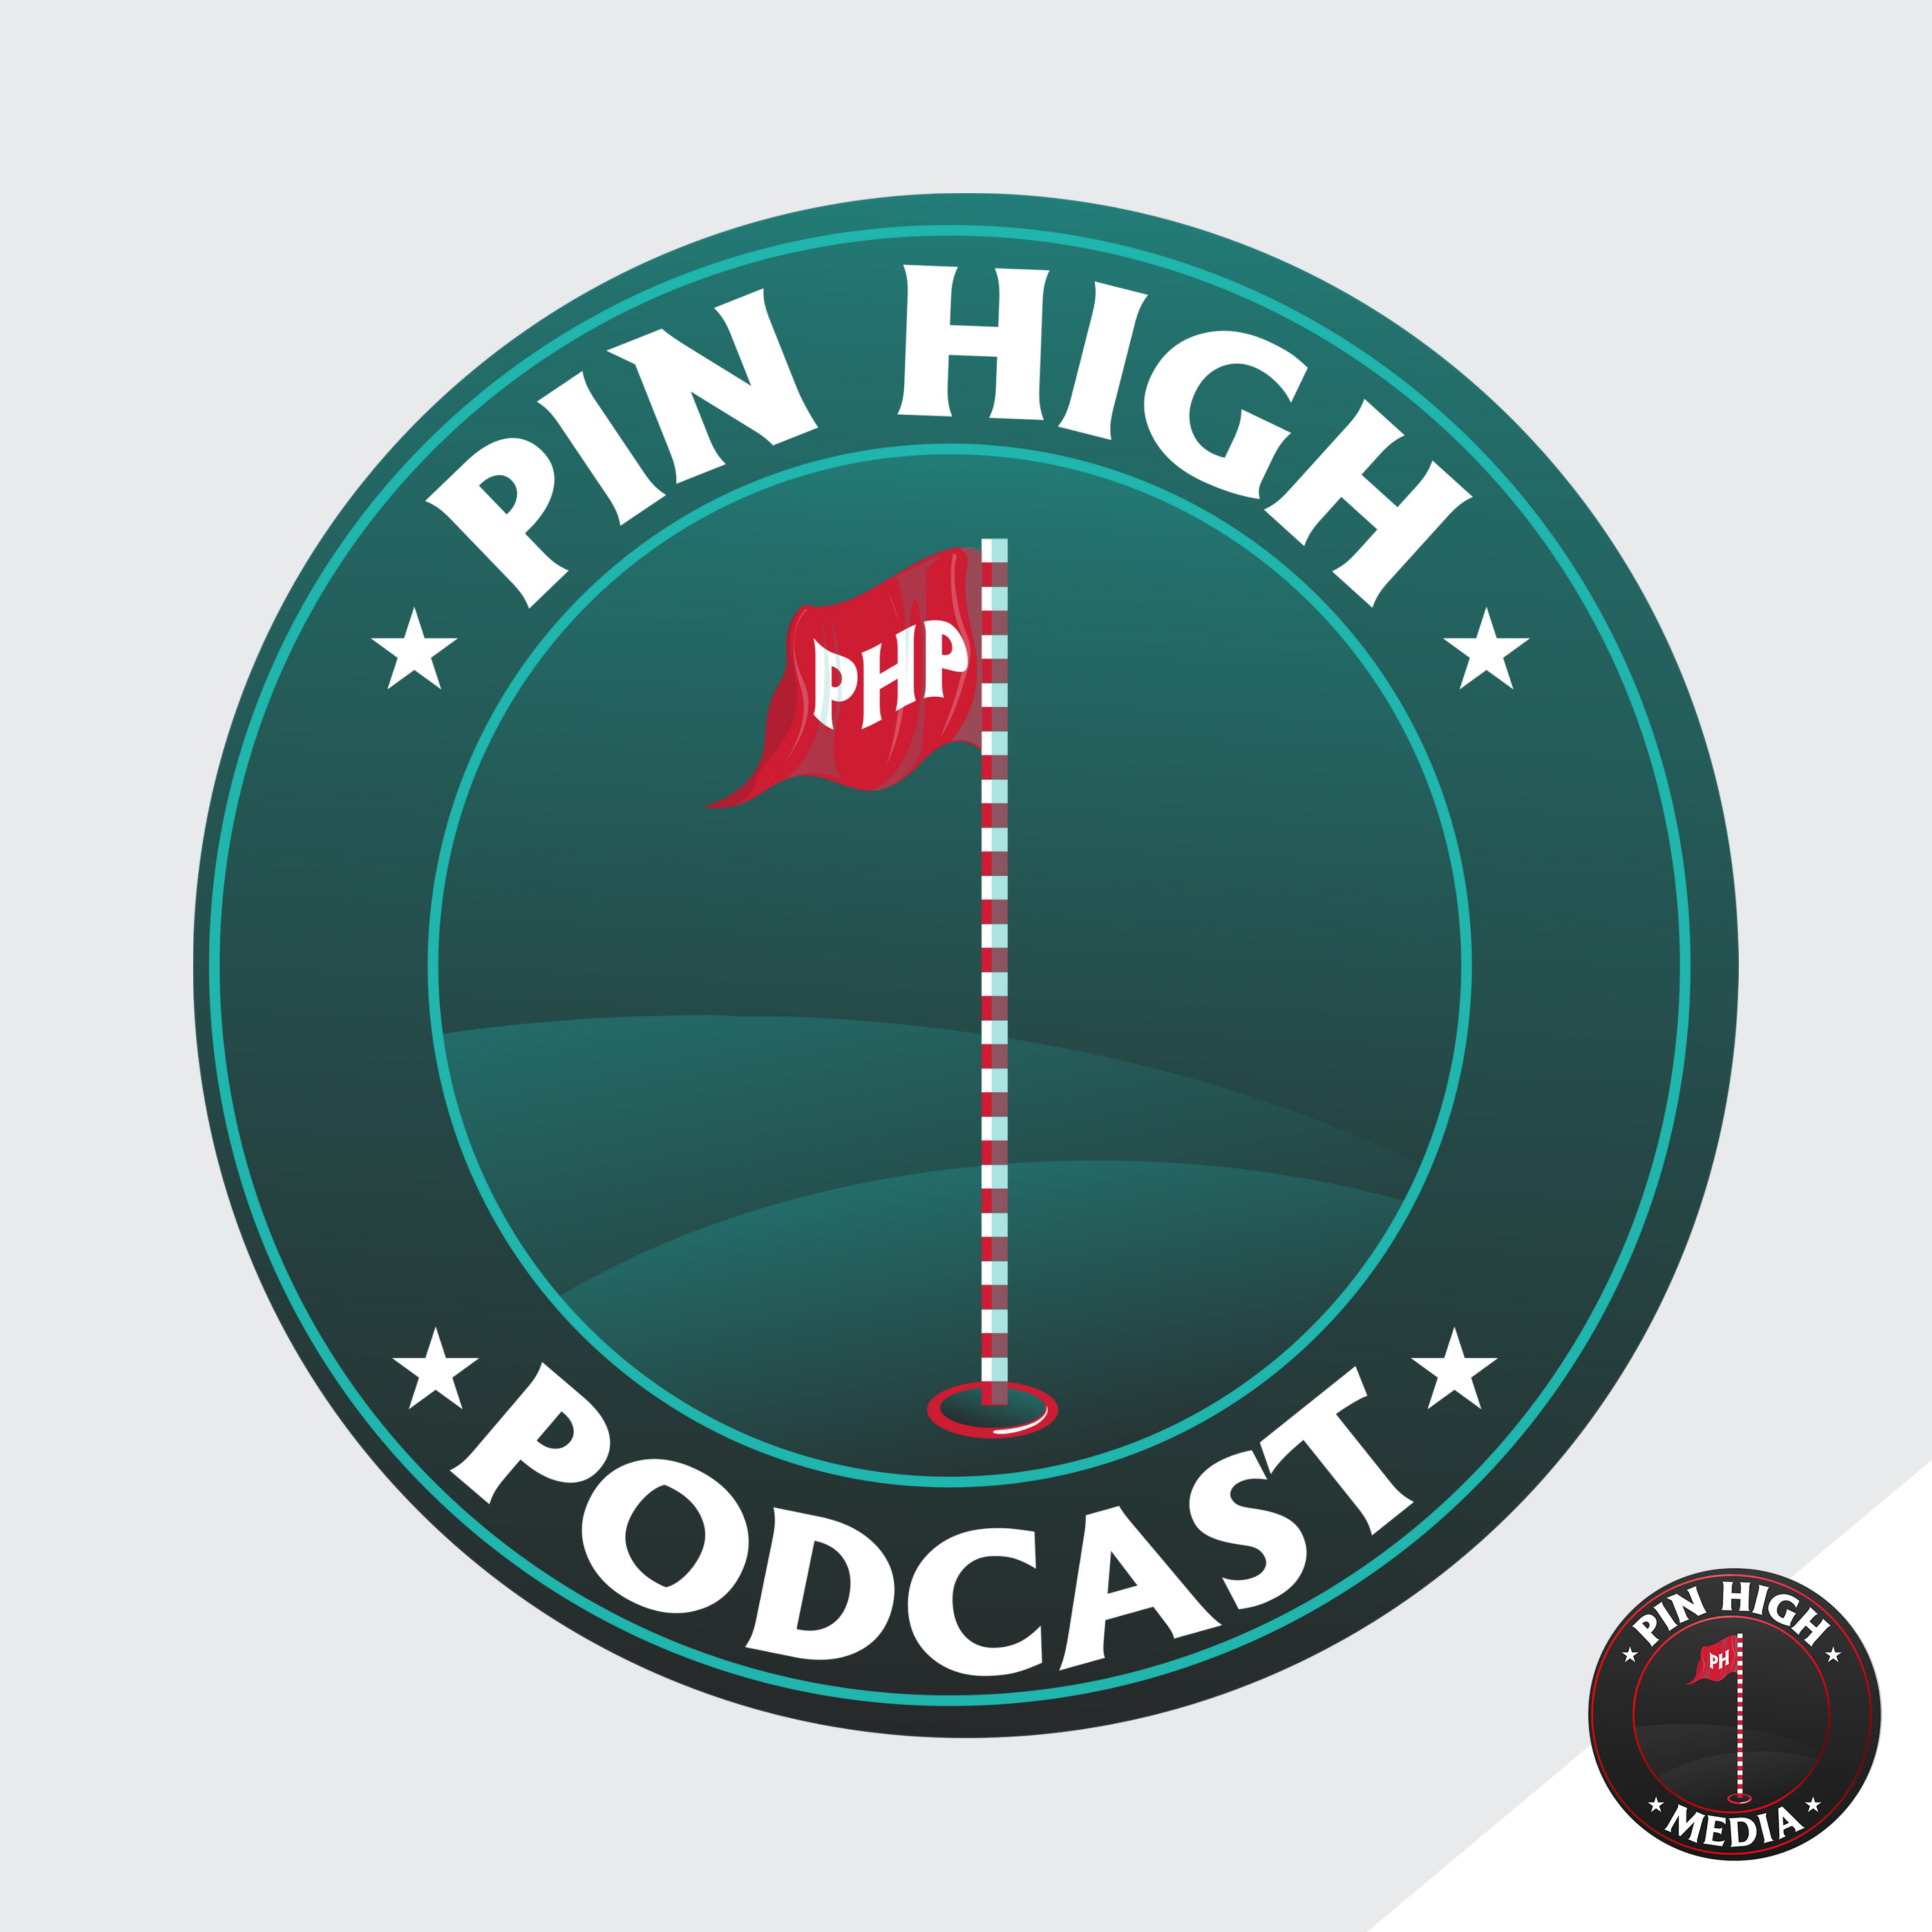 Pin High Podcast Ep. 155: Who Do We Pick For the CJ Cup?